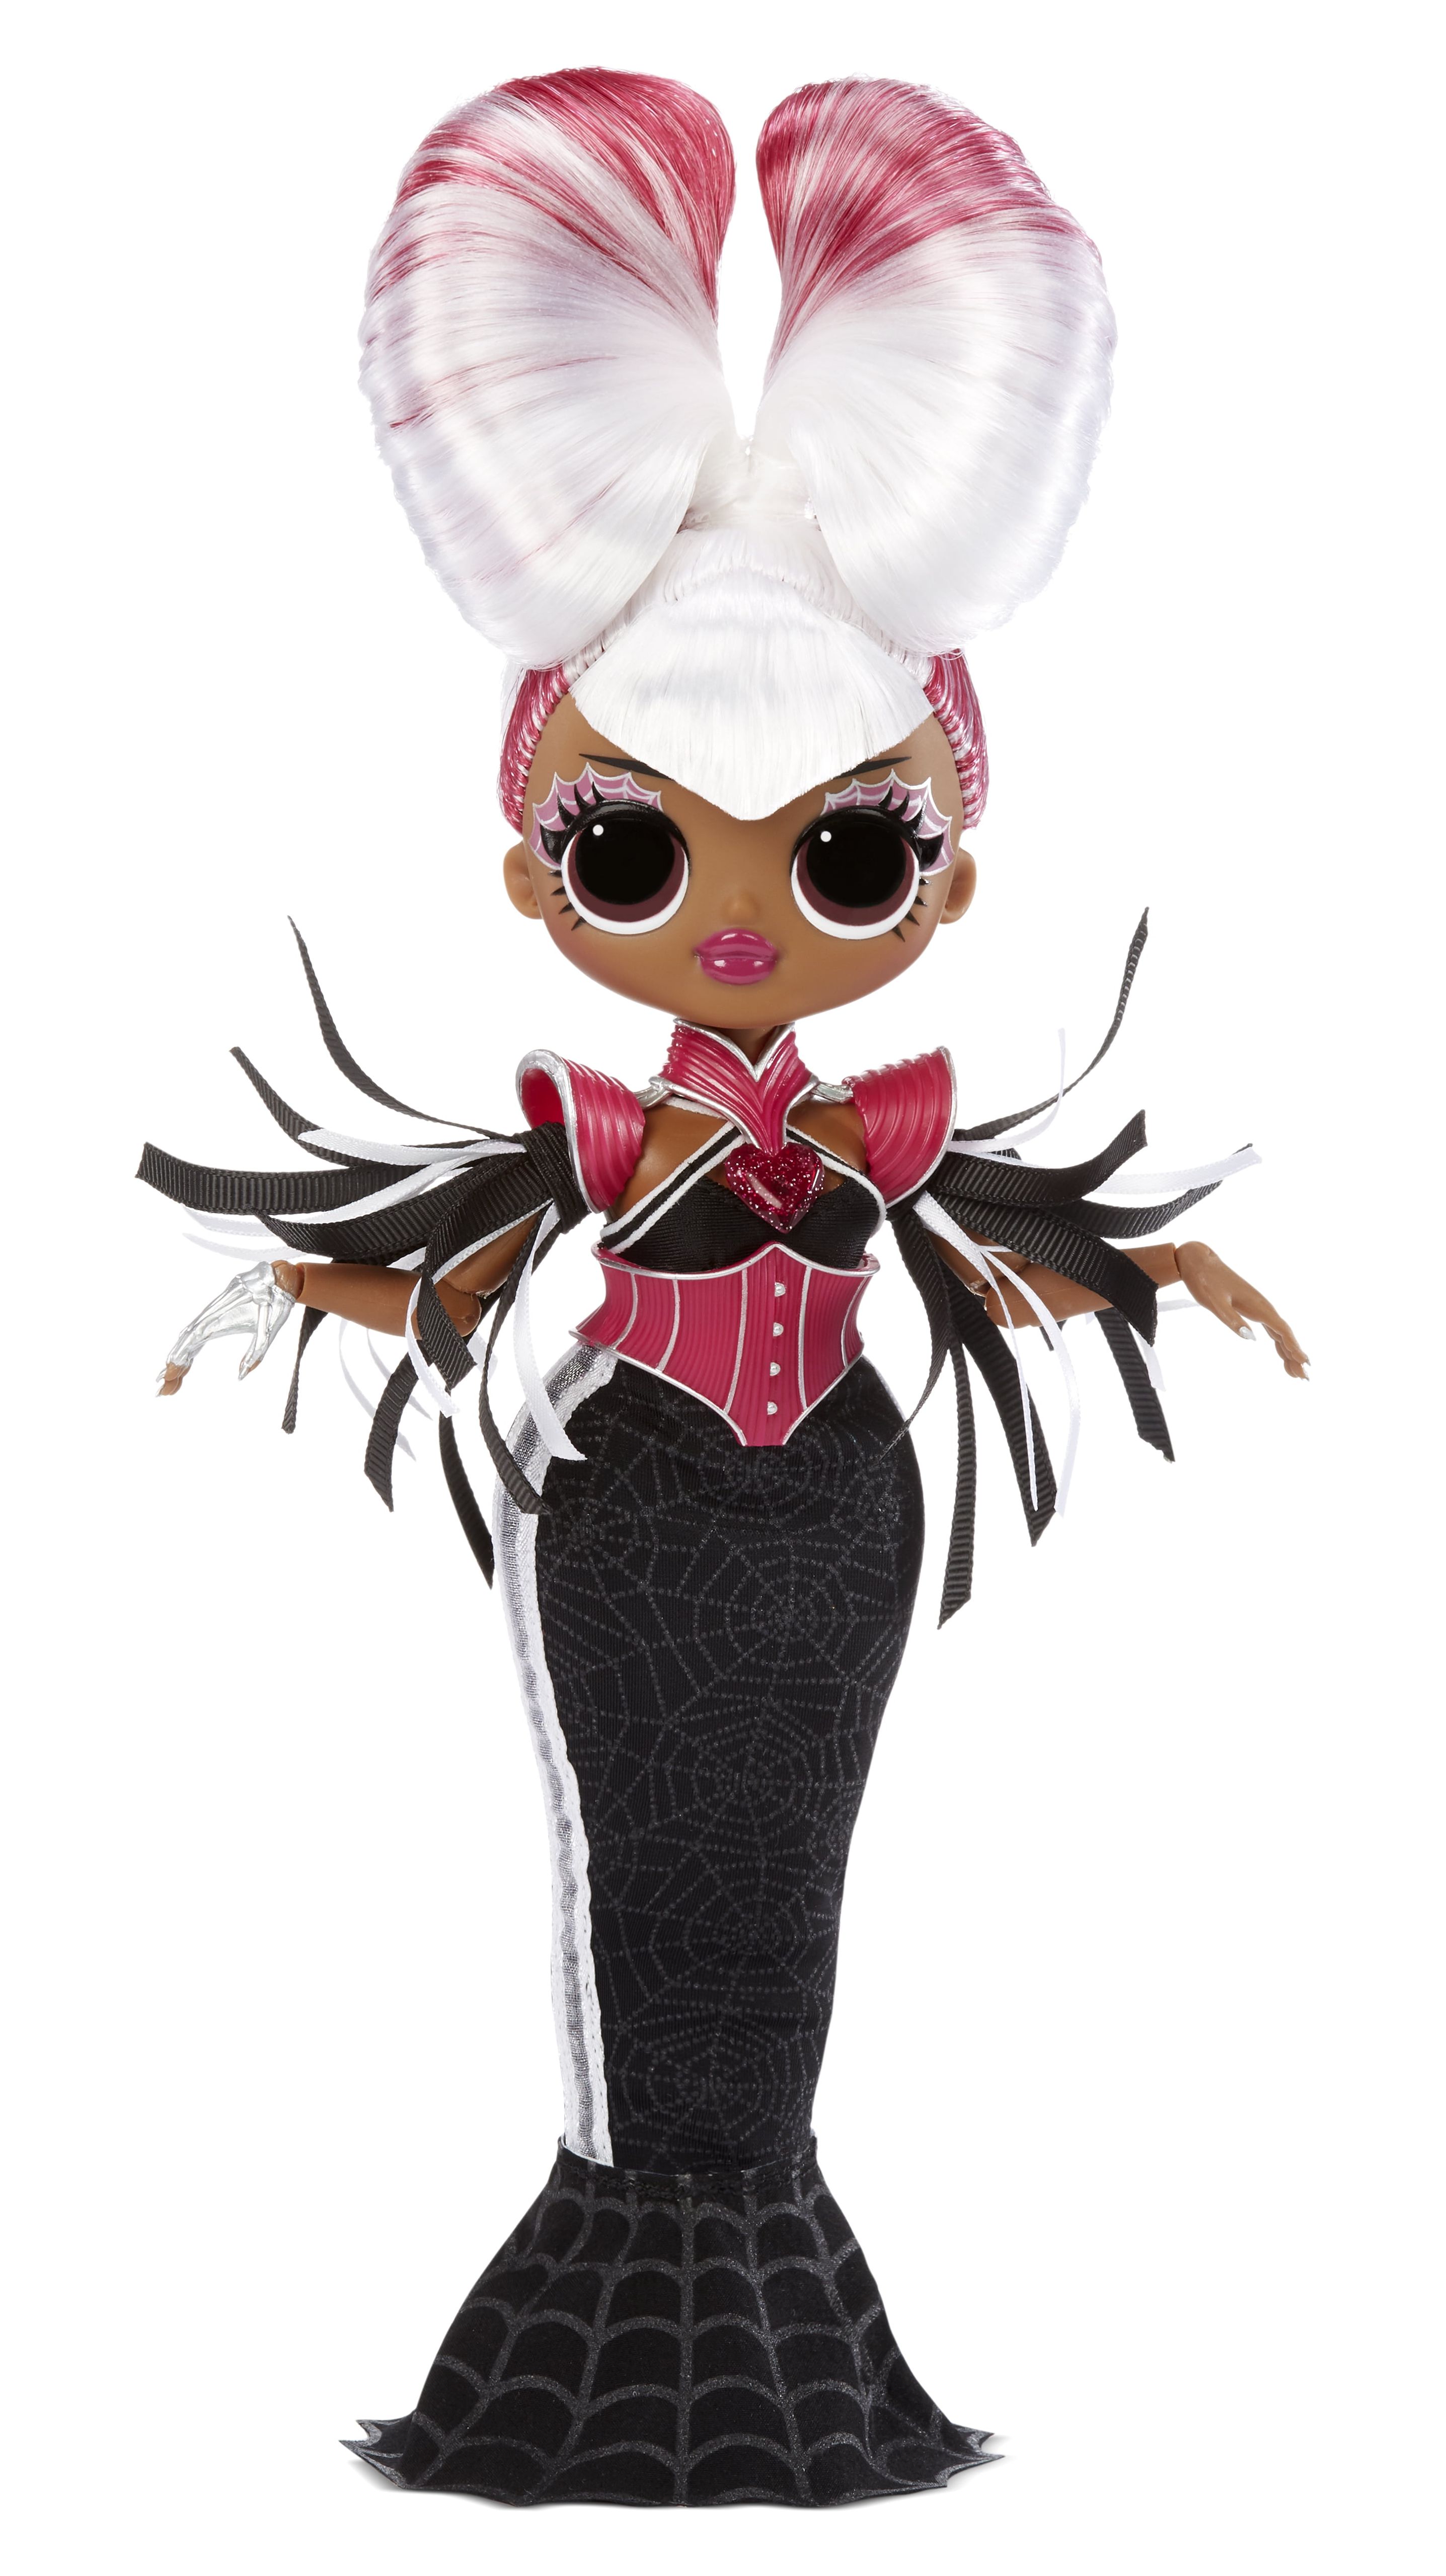 LOL Surprise Omg Movie Magic Spirit Queen Fashion Doll with 25 Surprises Including 2 Fashion Outfits, 3D Glasses, Movie Accessories And Reusable Playset – Great Gift for Girls Ages 4+ - image 1 of 7